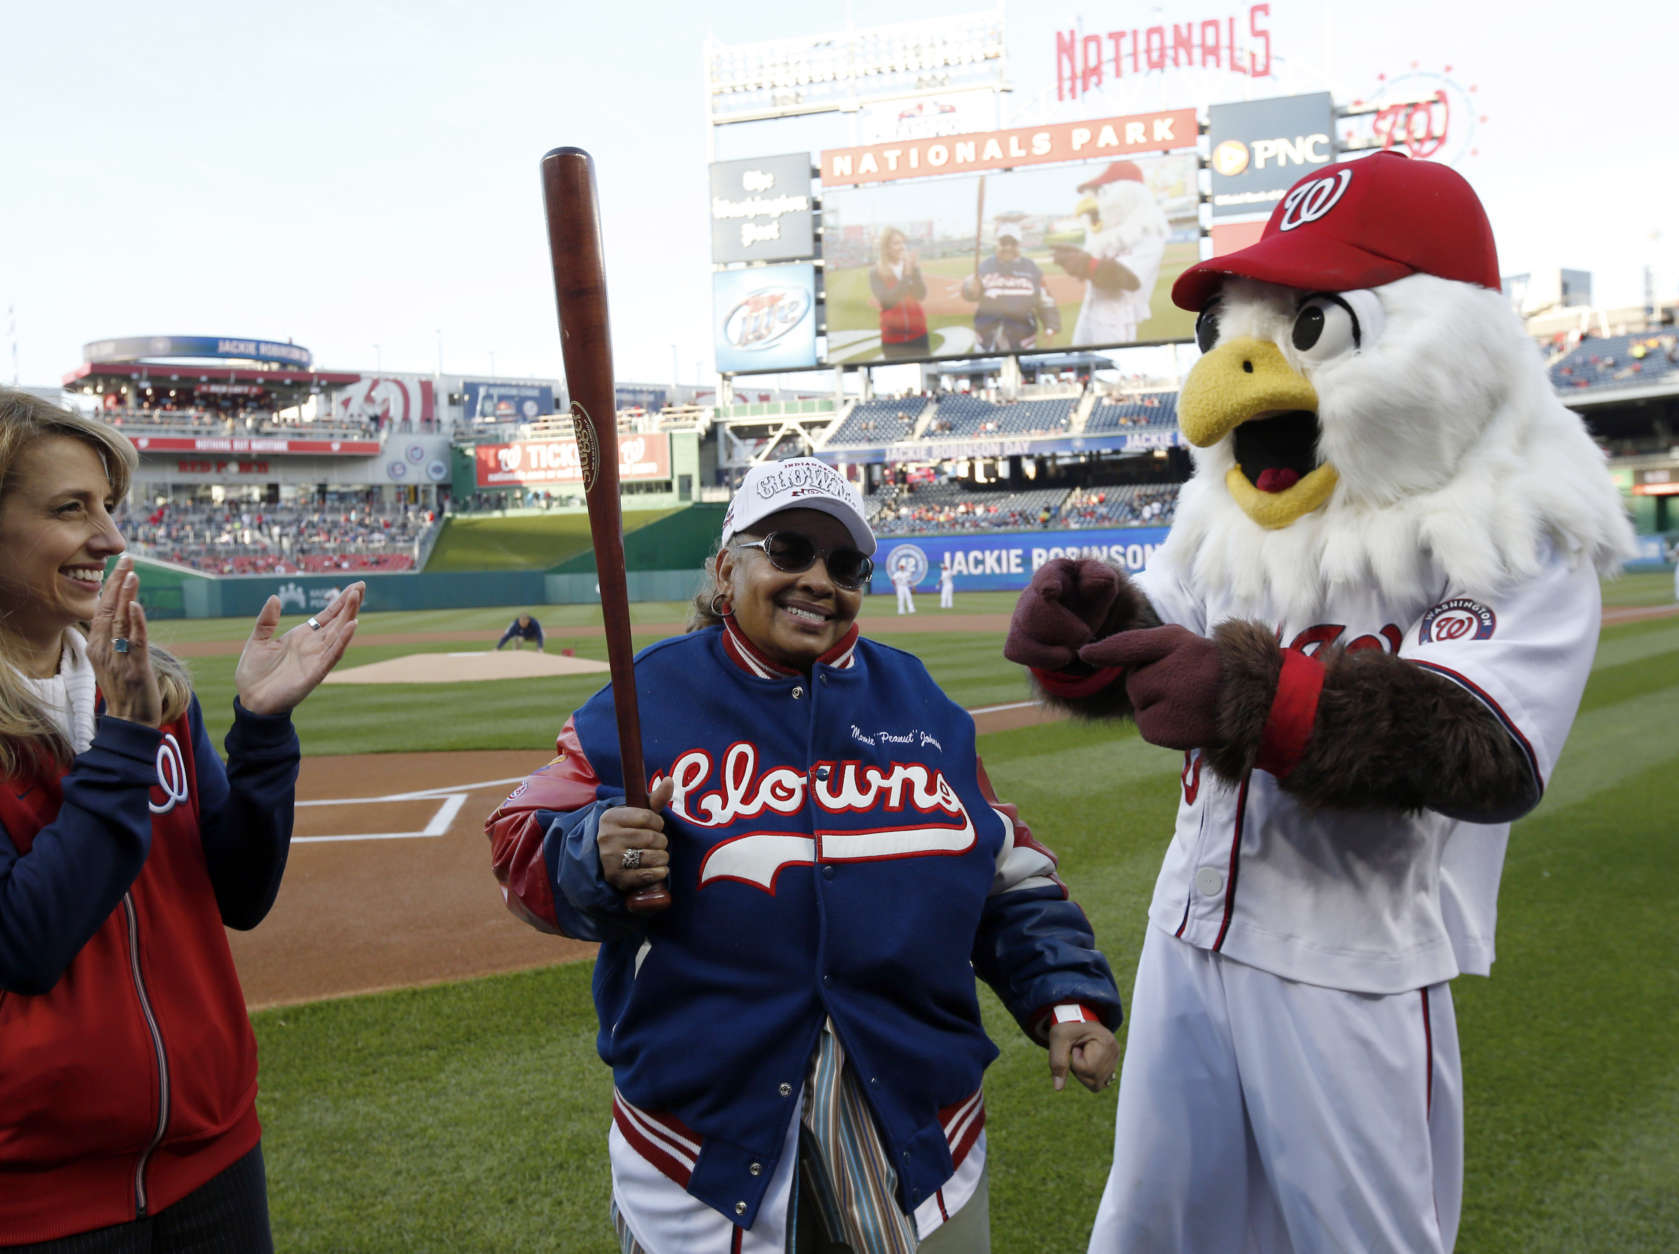 Mamie "Peanut" Johnson, center, holds a bat she was presented as she is honored on before a baseball game between the Washington Nationals and the St. Louis Cardinals at Nationals Park Thursday, April 17, 2014, in Washington. Johnson was one of three women to play in the Negro Leagues. (AP Photo/Alex Brandon)